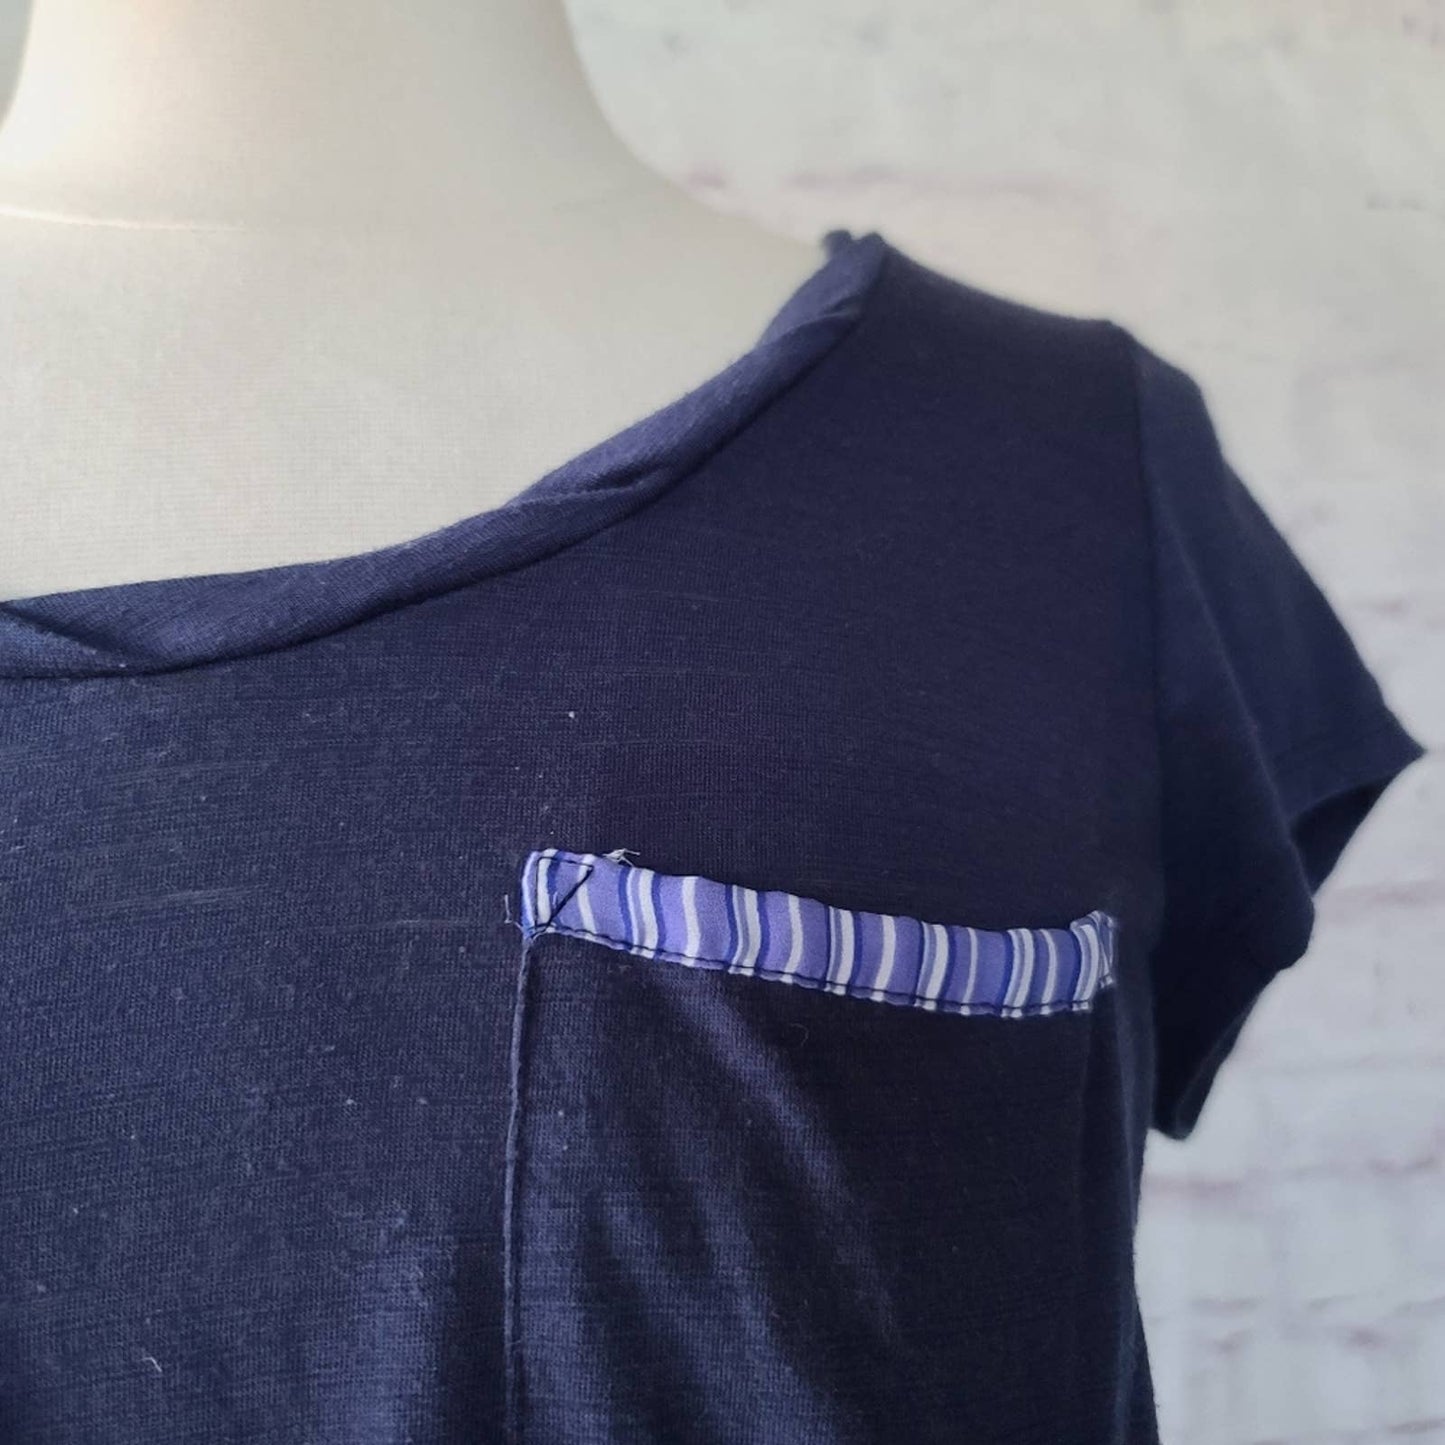 Anthropologie One September Navy Mixed Material Pleated Back Swing Tee Medium